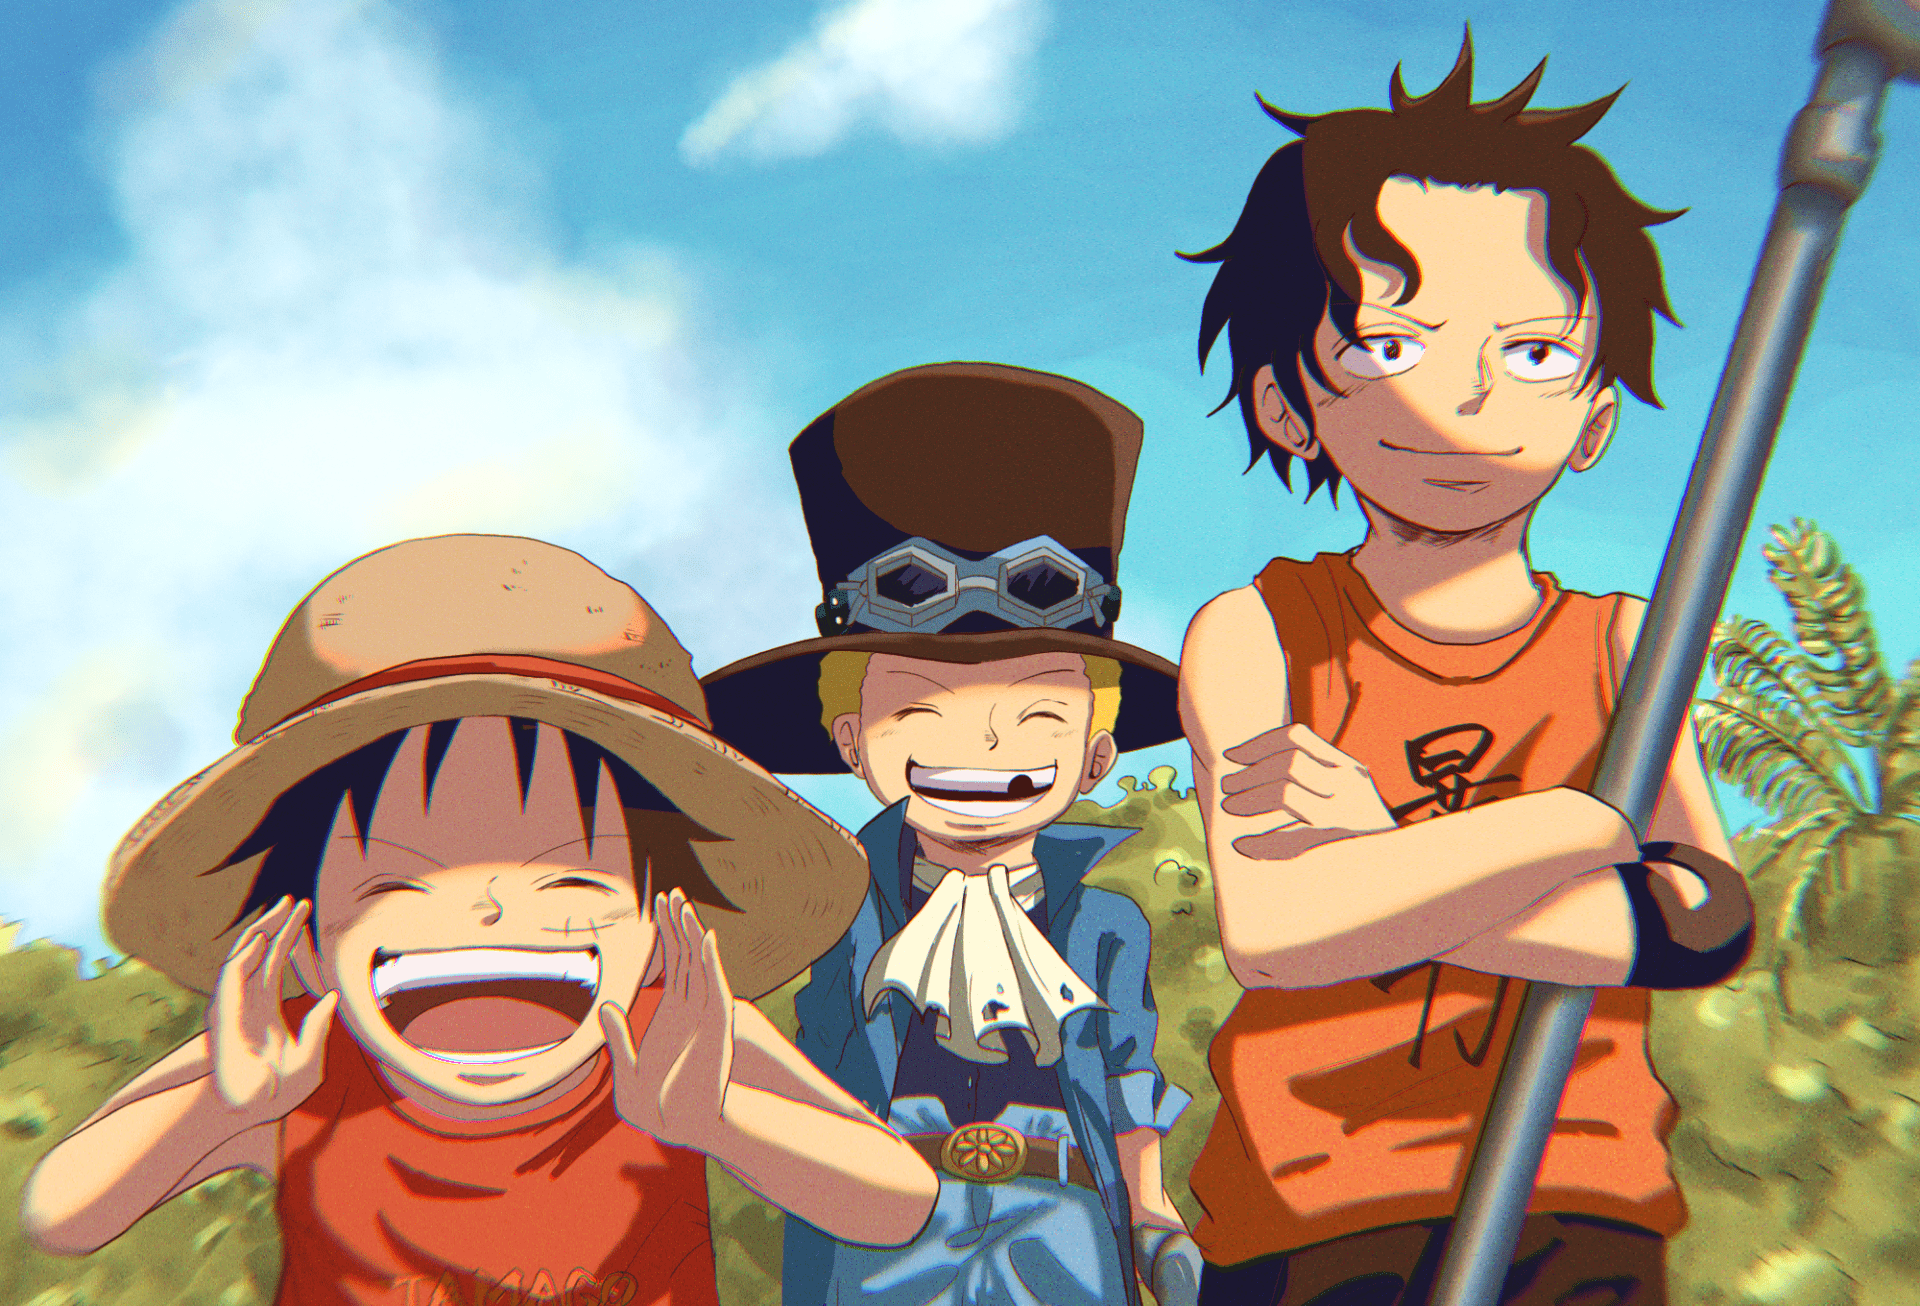 Luffy, Ace and Sabo Wallpapers - Top Free Luffy, Ace and Sabo ...